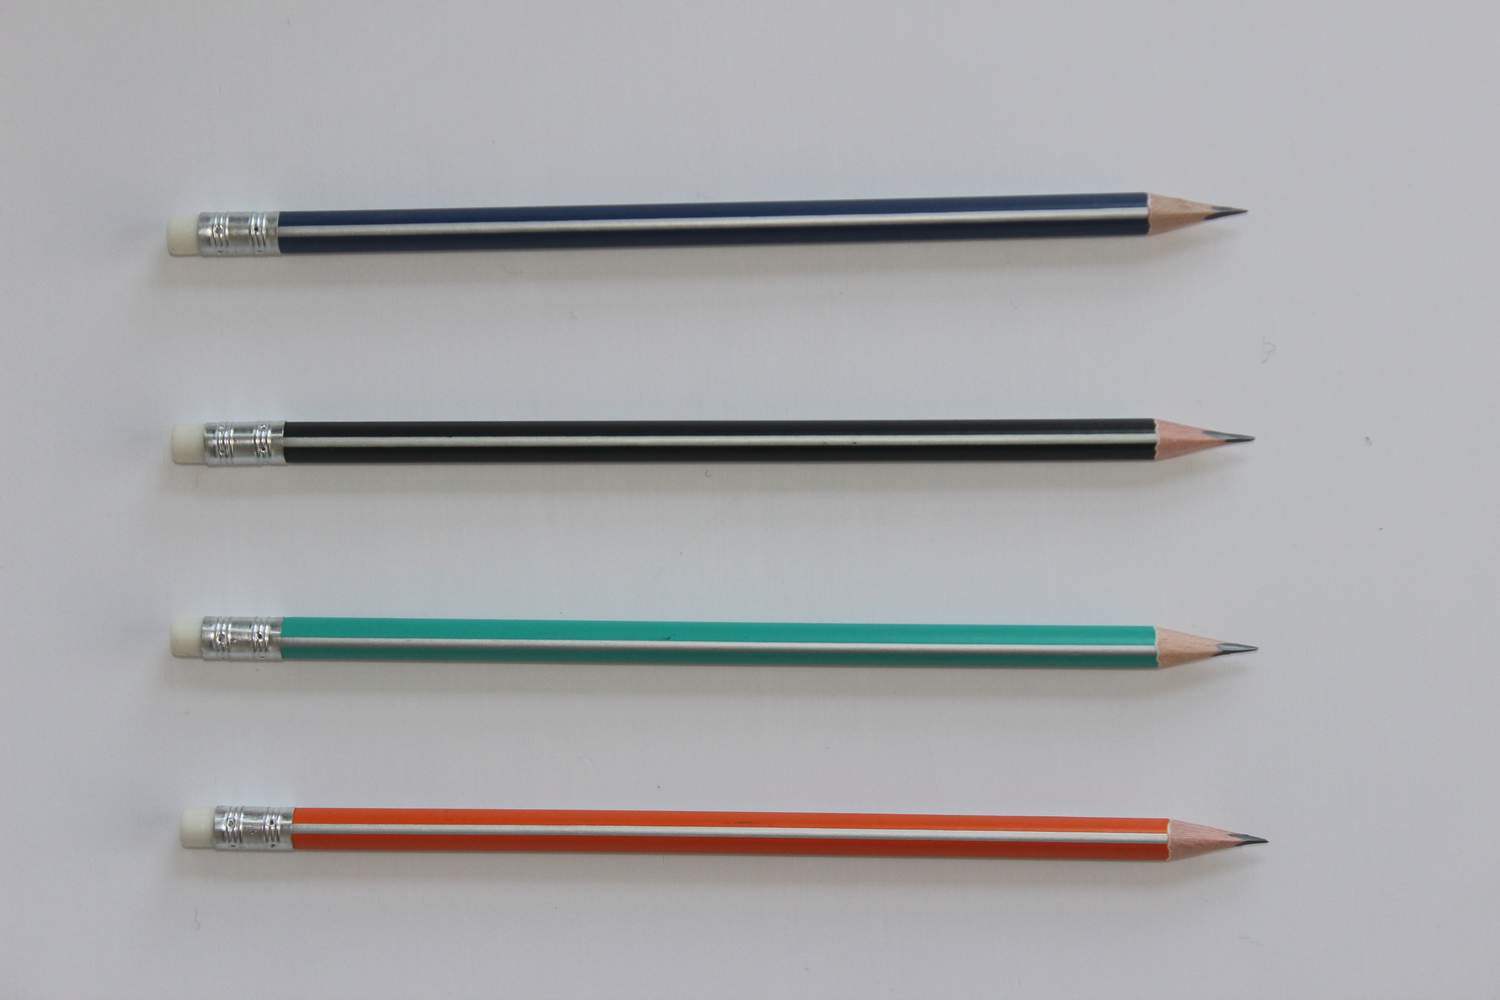 Triangle Hb Pencils with Strip and Eraser